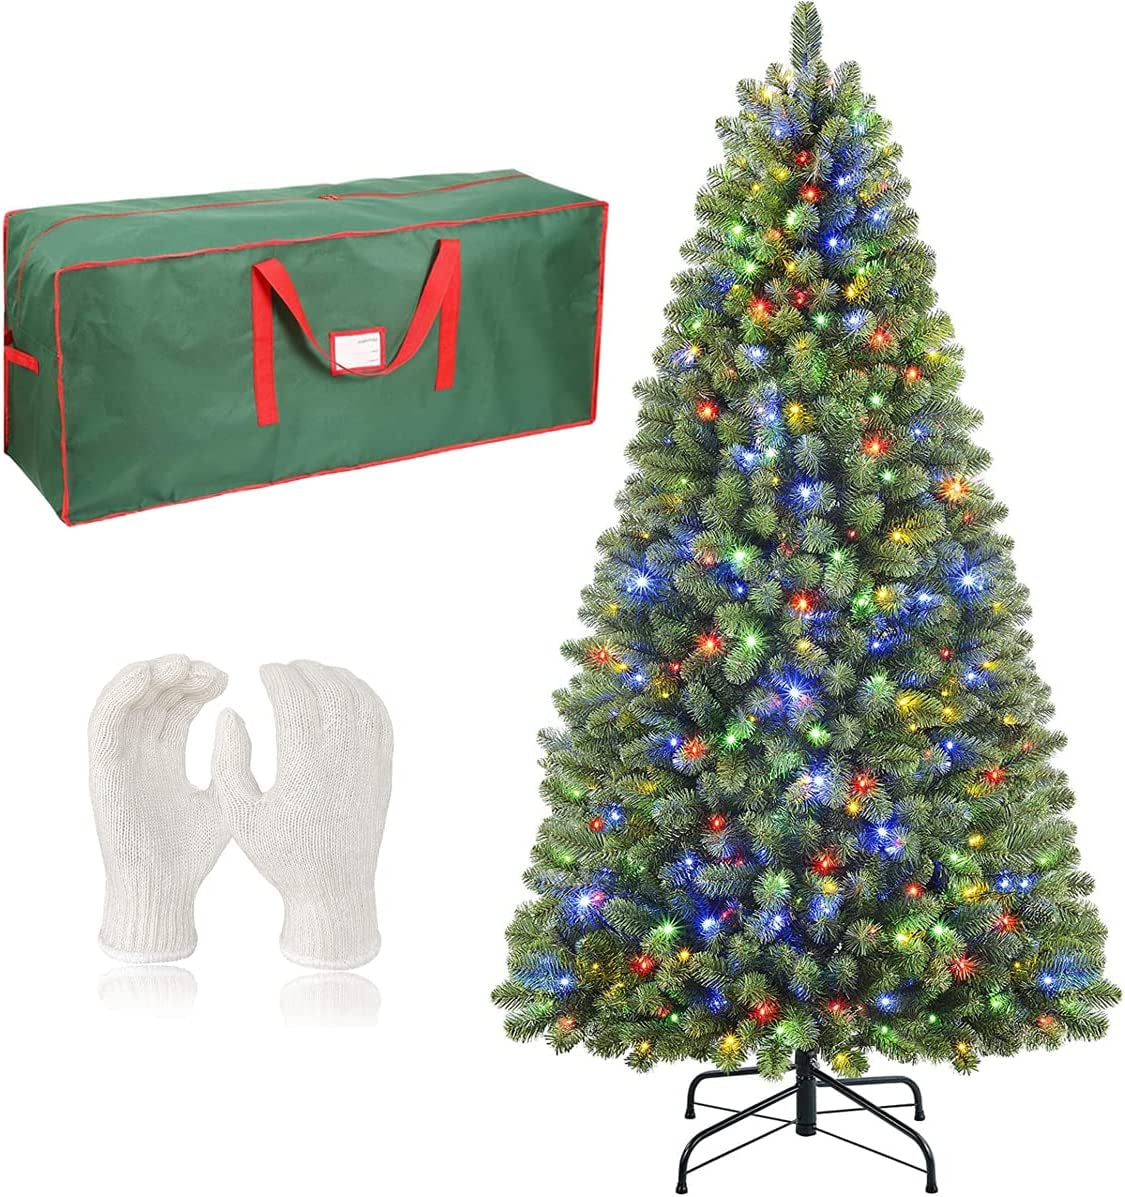 How to fluff a Christmas tree - 6 easy tips to follow